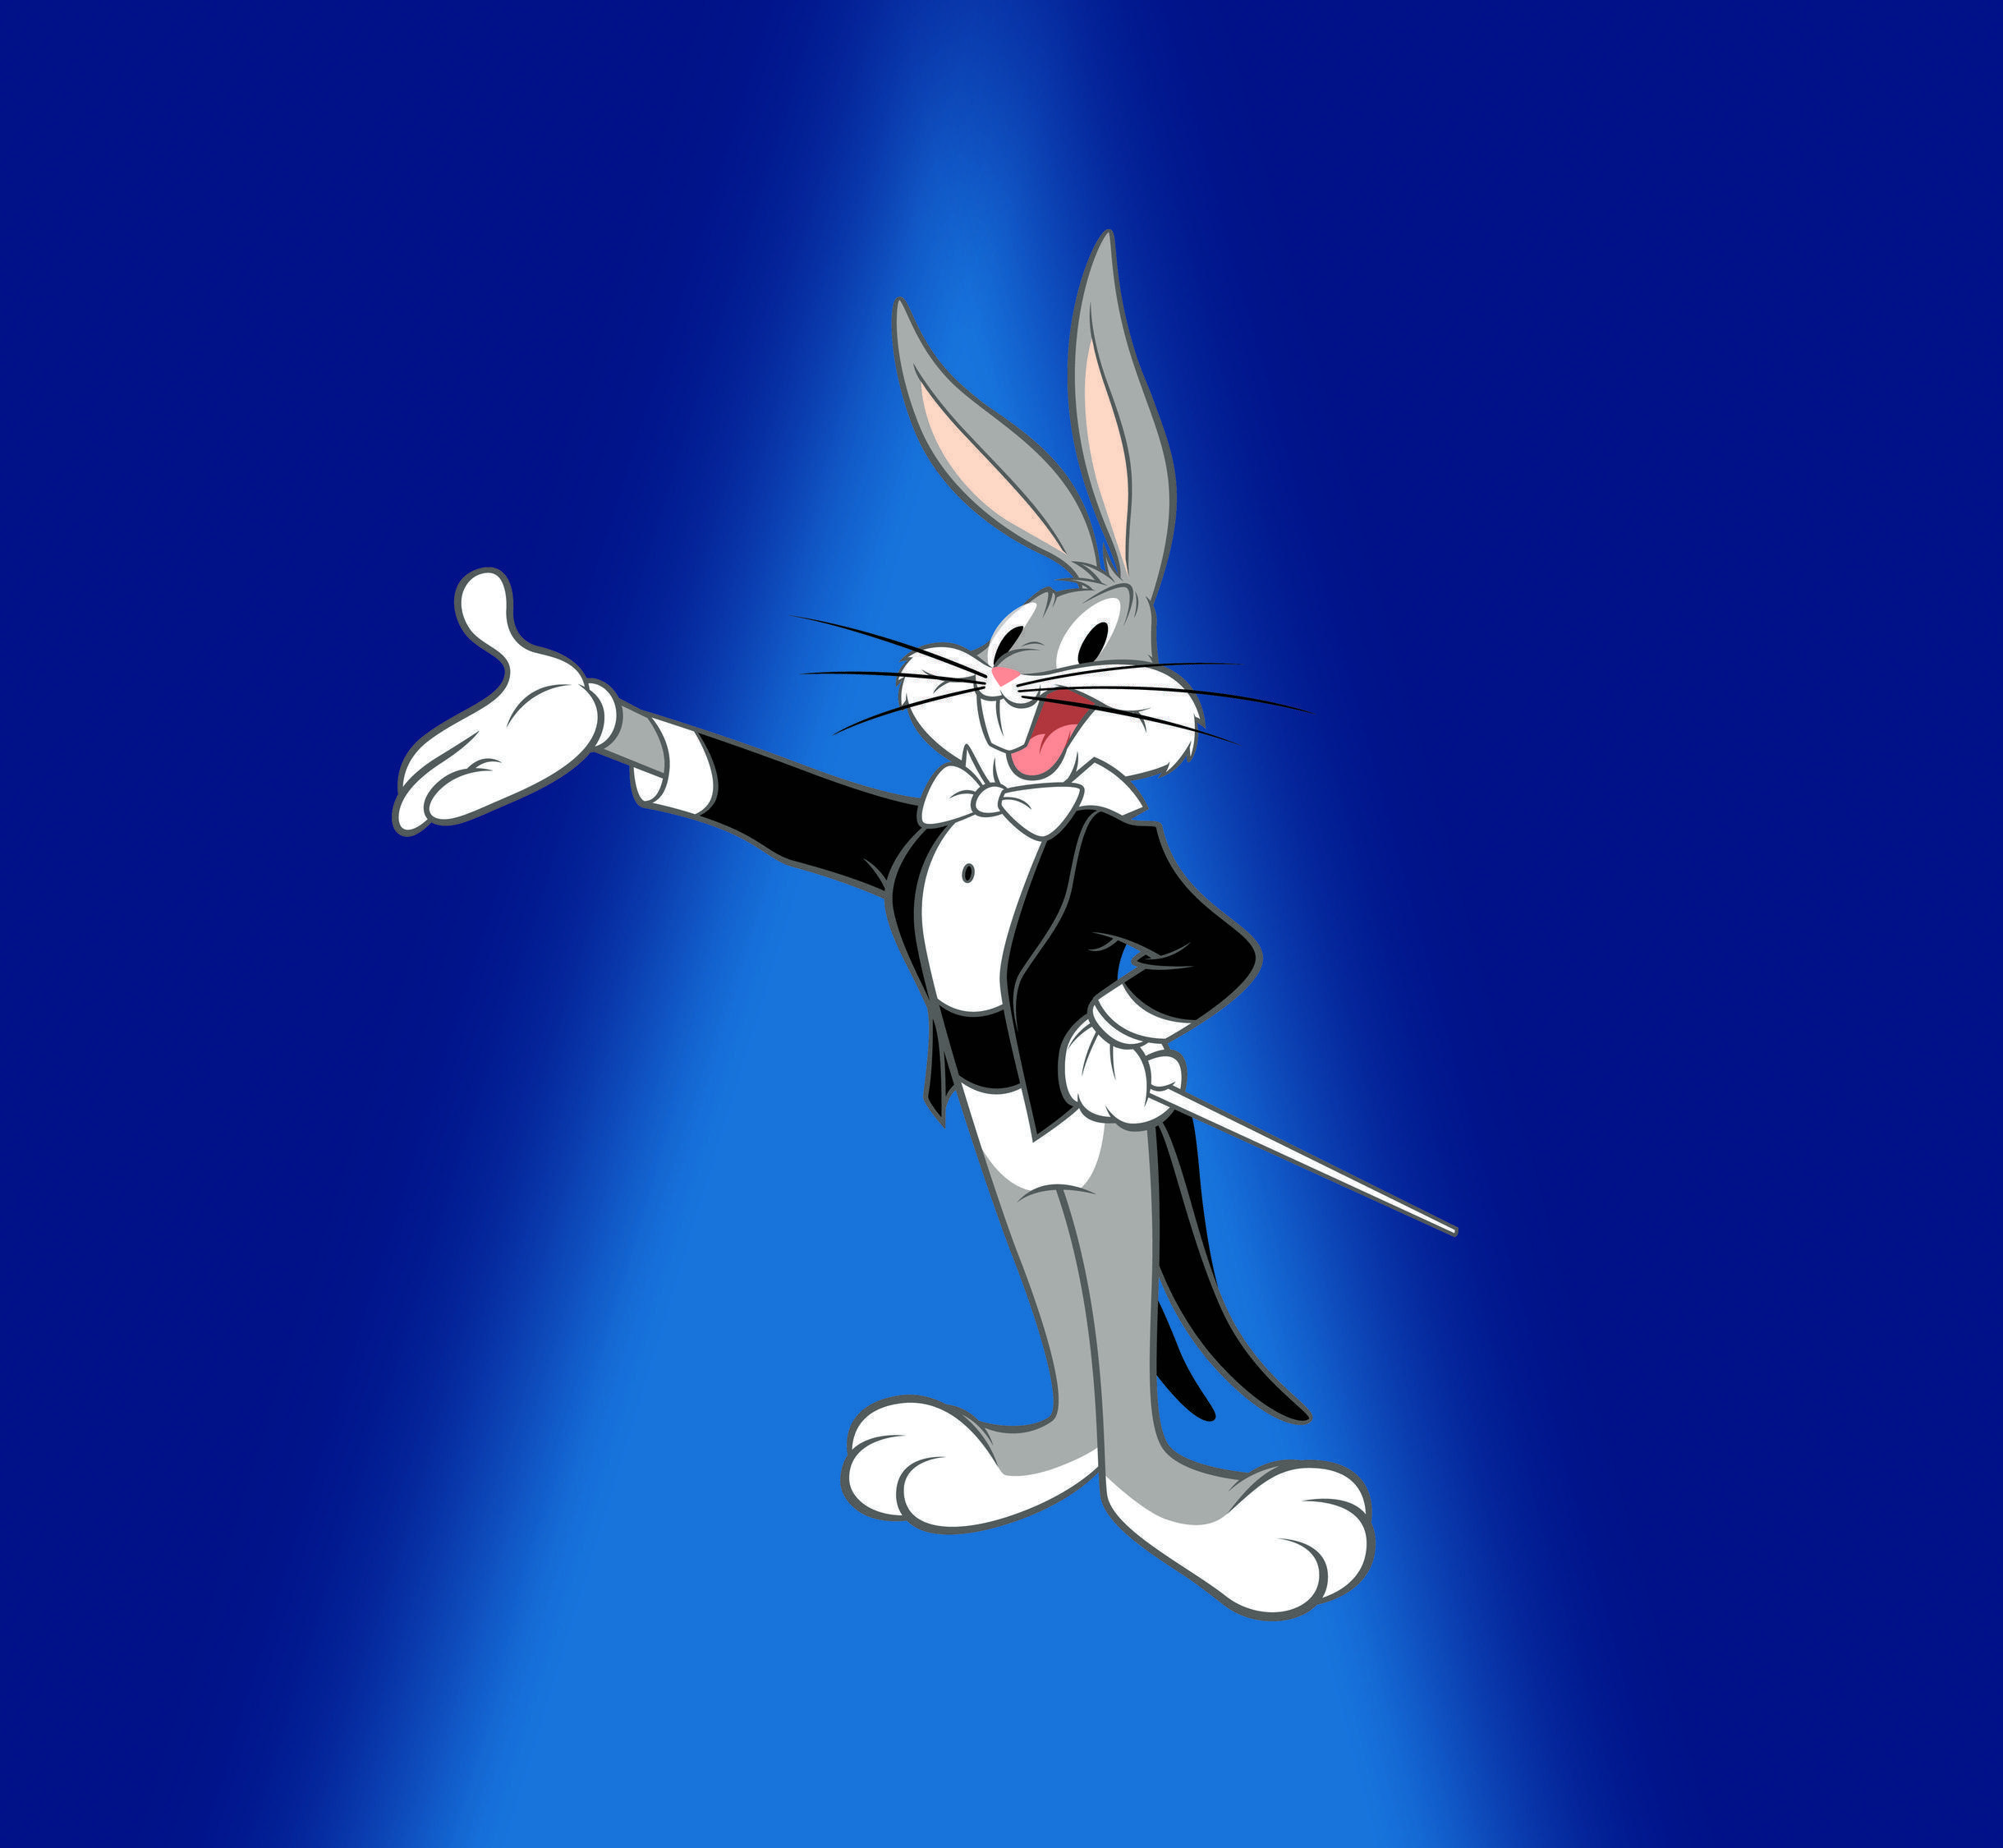 Dope Bugs Bunny Wallpapers on WallpaperDog